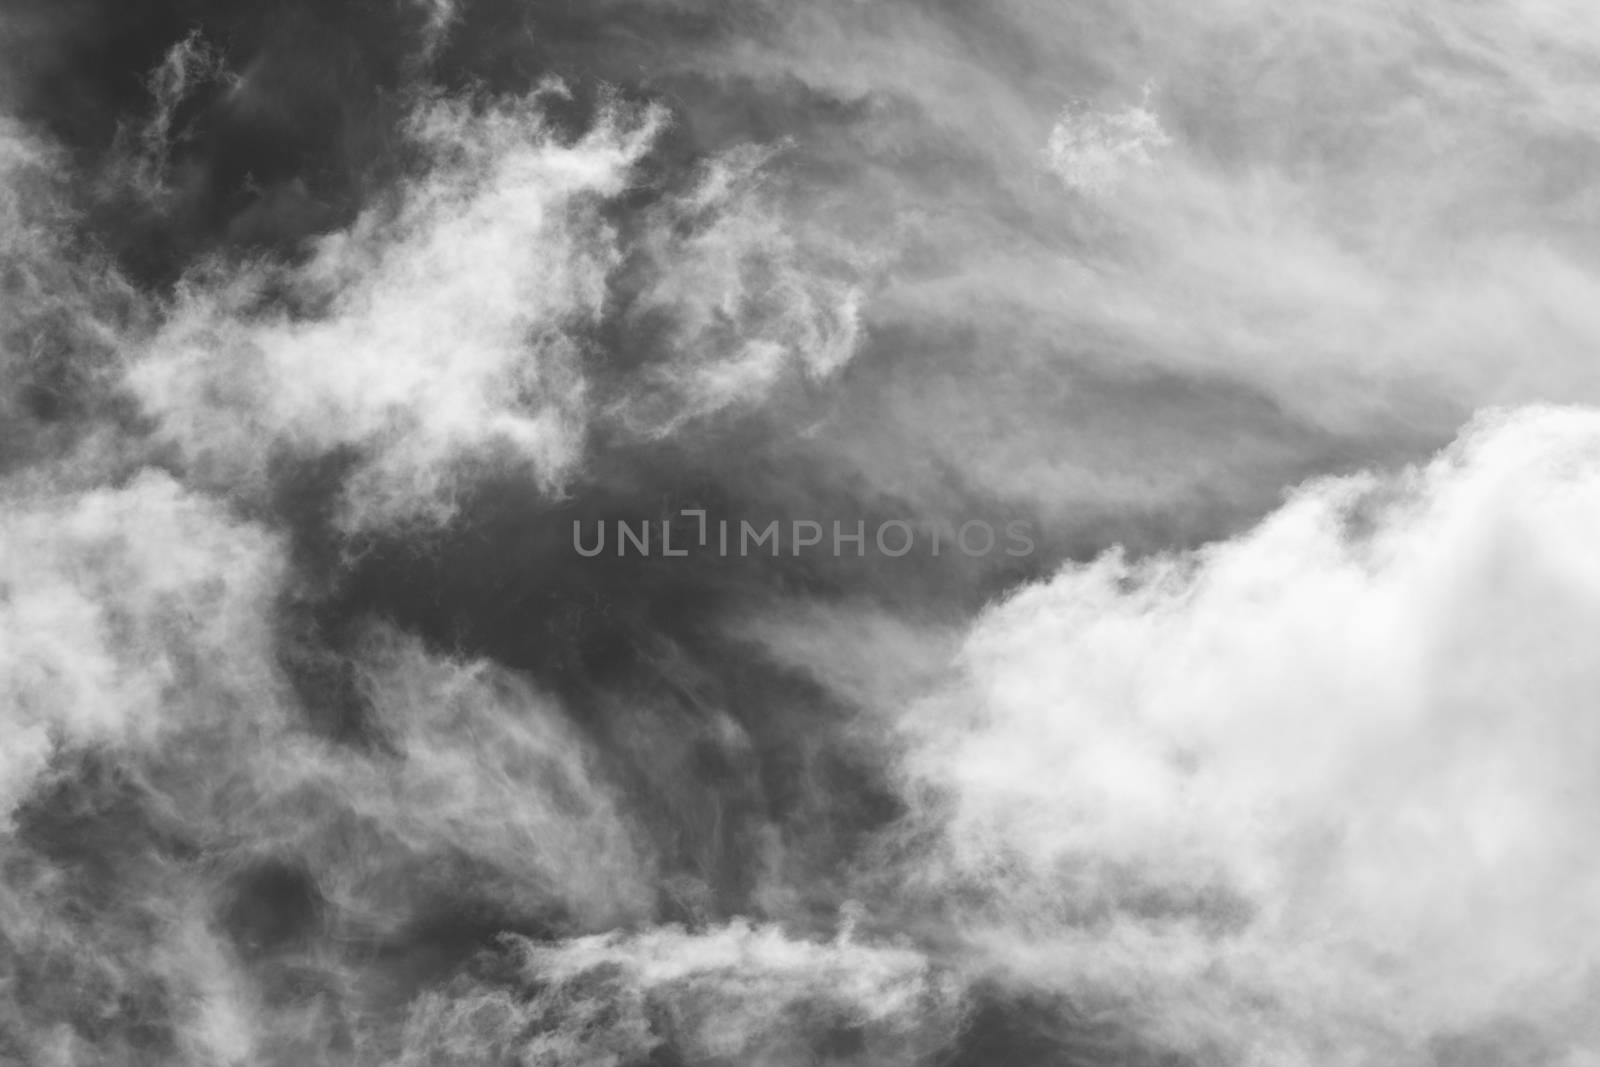 Cloudscape texture background of black and white dramatic monochrome cumulus clouds